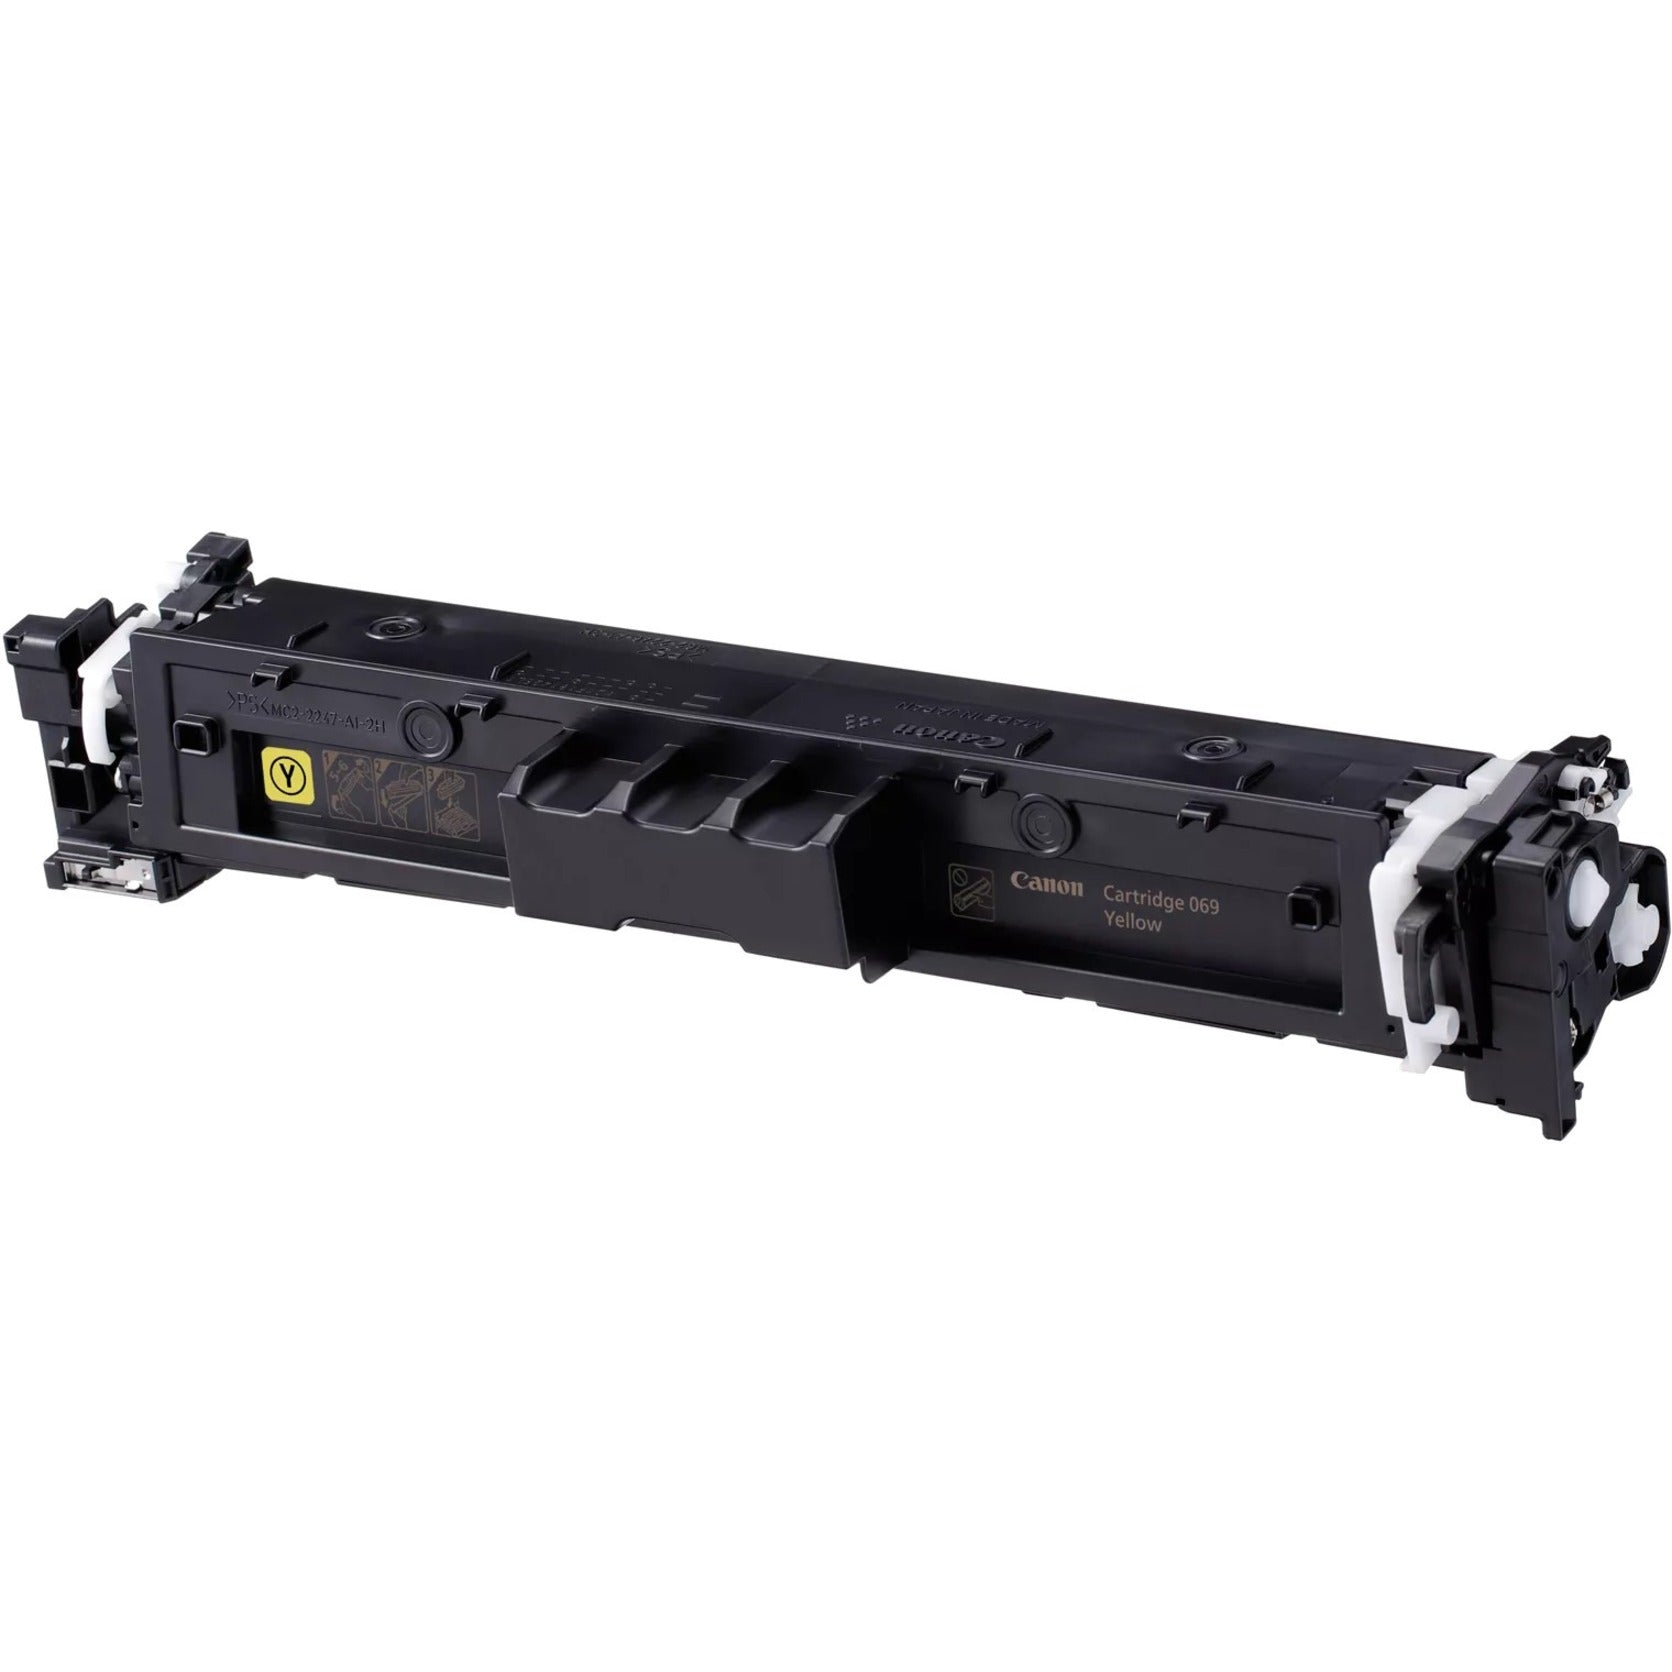 Canon 5091C001 069 Toner Cartridge, Yellow, 1900 Pages